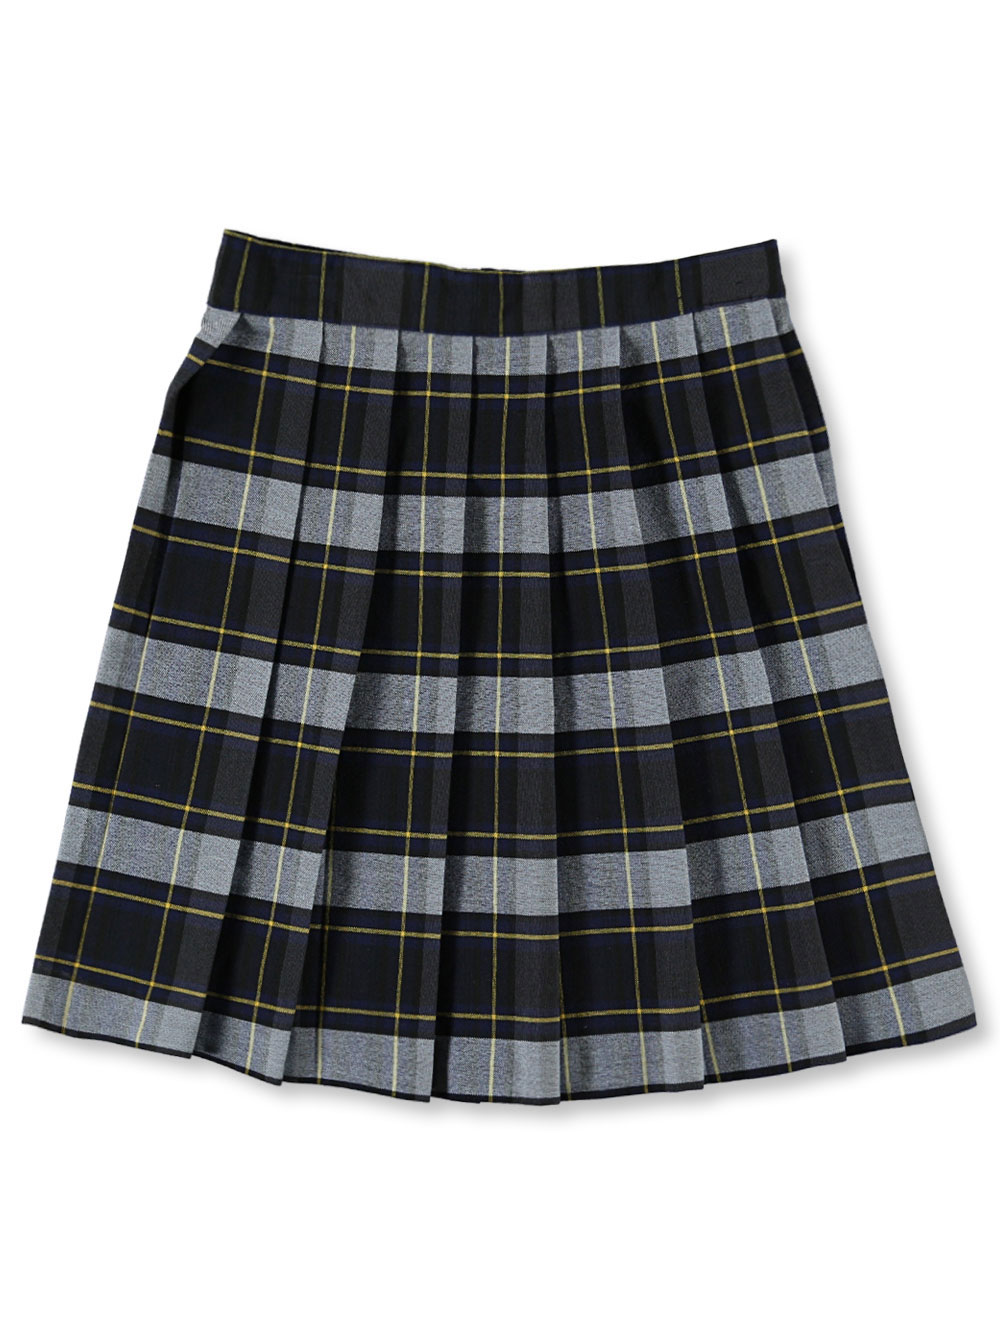 At School by French Toast French Toast Big Girls' Plaid Skirt (Sizes 7 - 18)